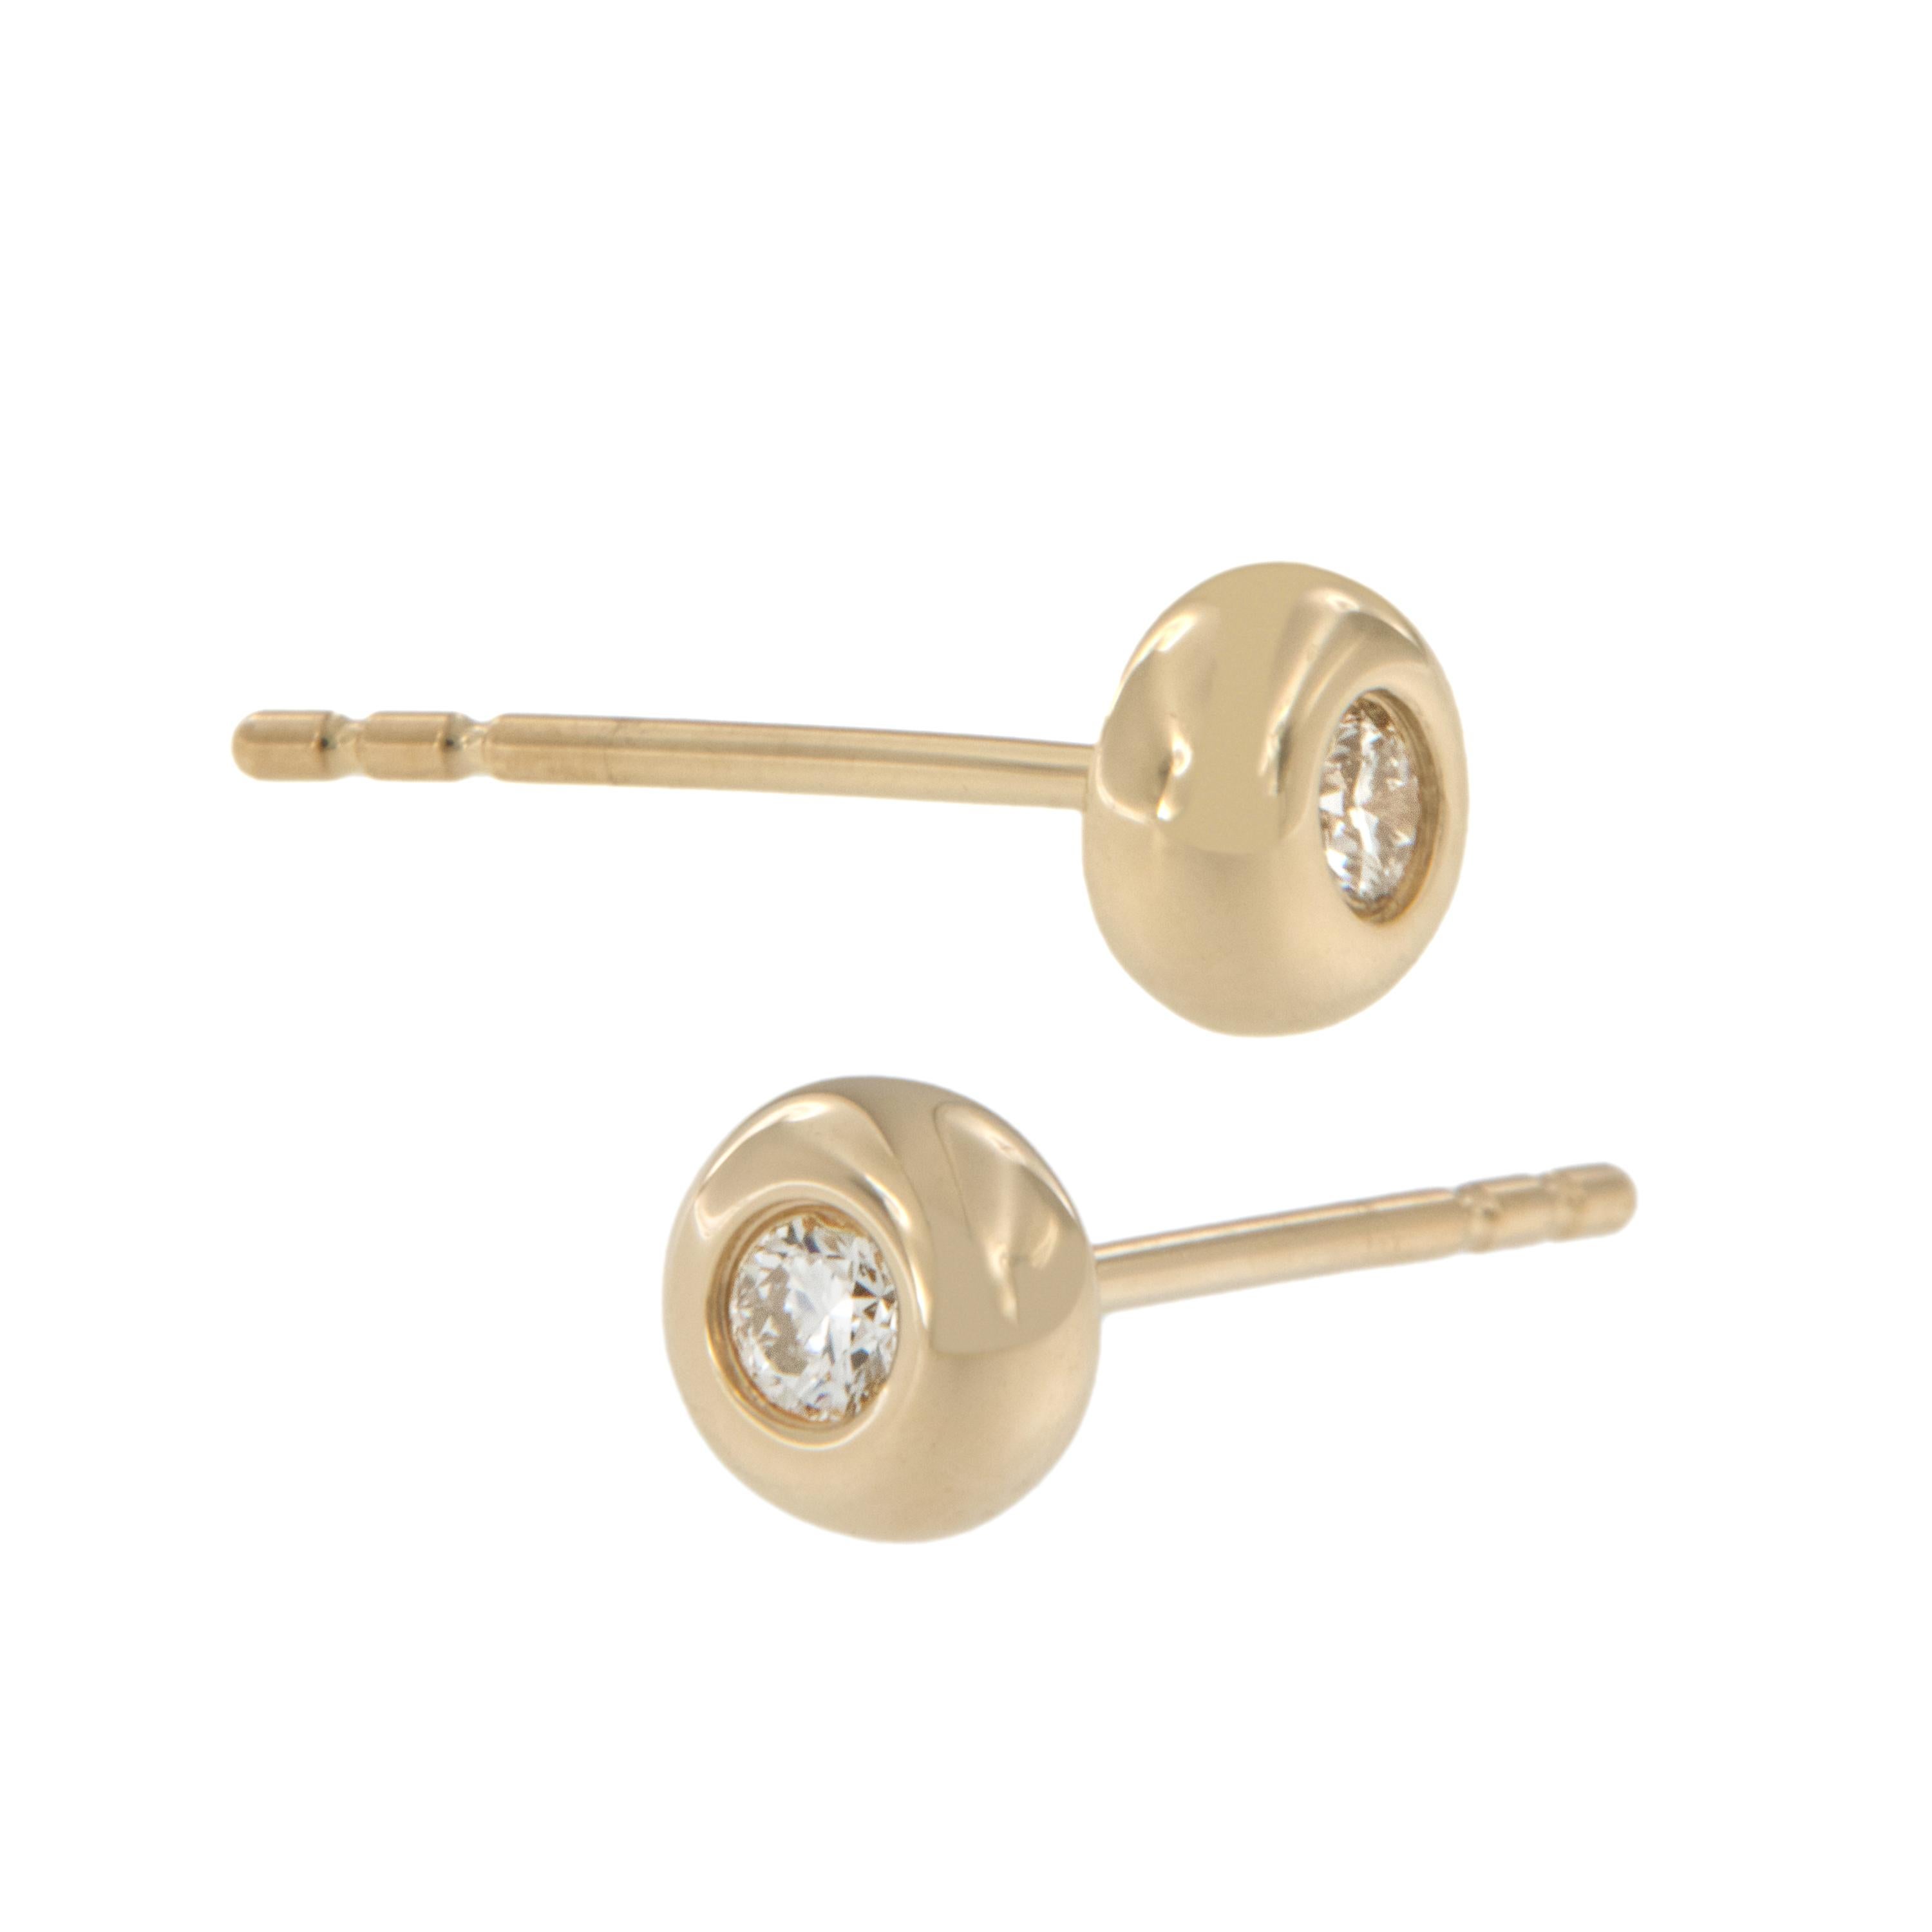 These are the perfect everyday earrings! Makes the ideal birthday, holiday, graduation gift. Made from 14 karat yellow gold, two round brilliant cut diamonds = 0.10 Cttw are expertly framed in puffy bezels with posts and friction backs for security